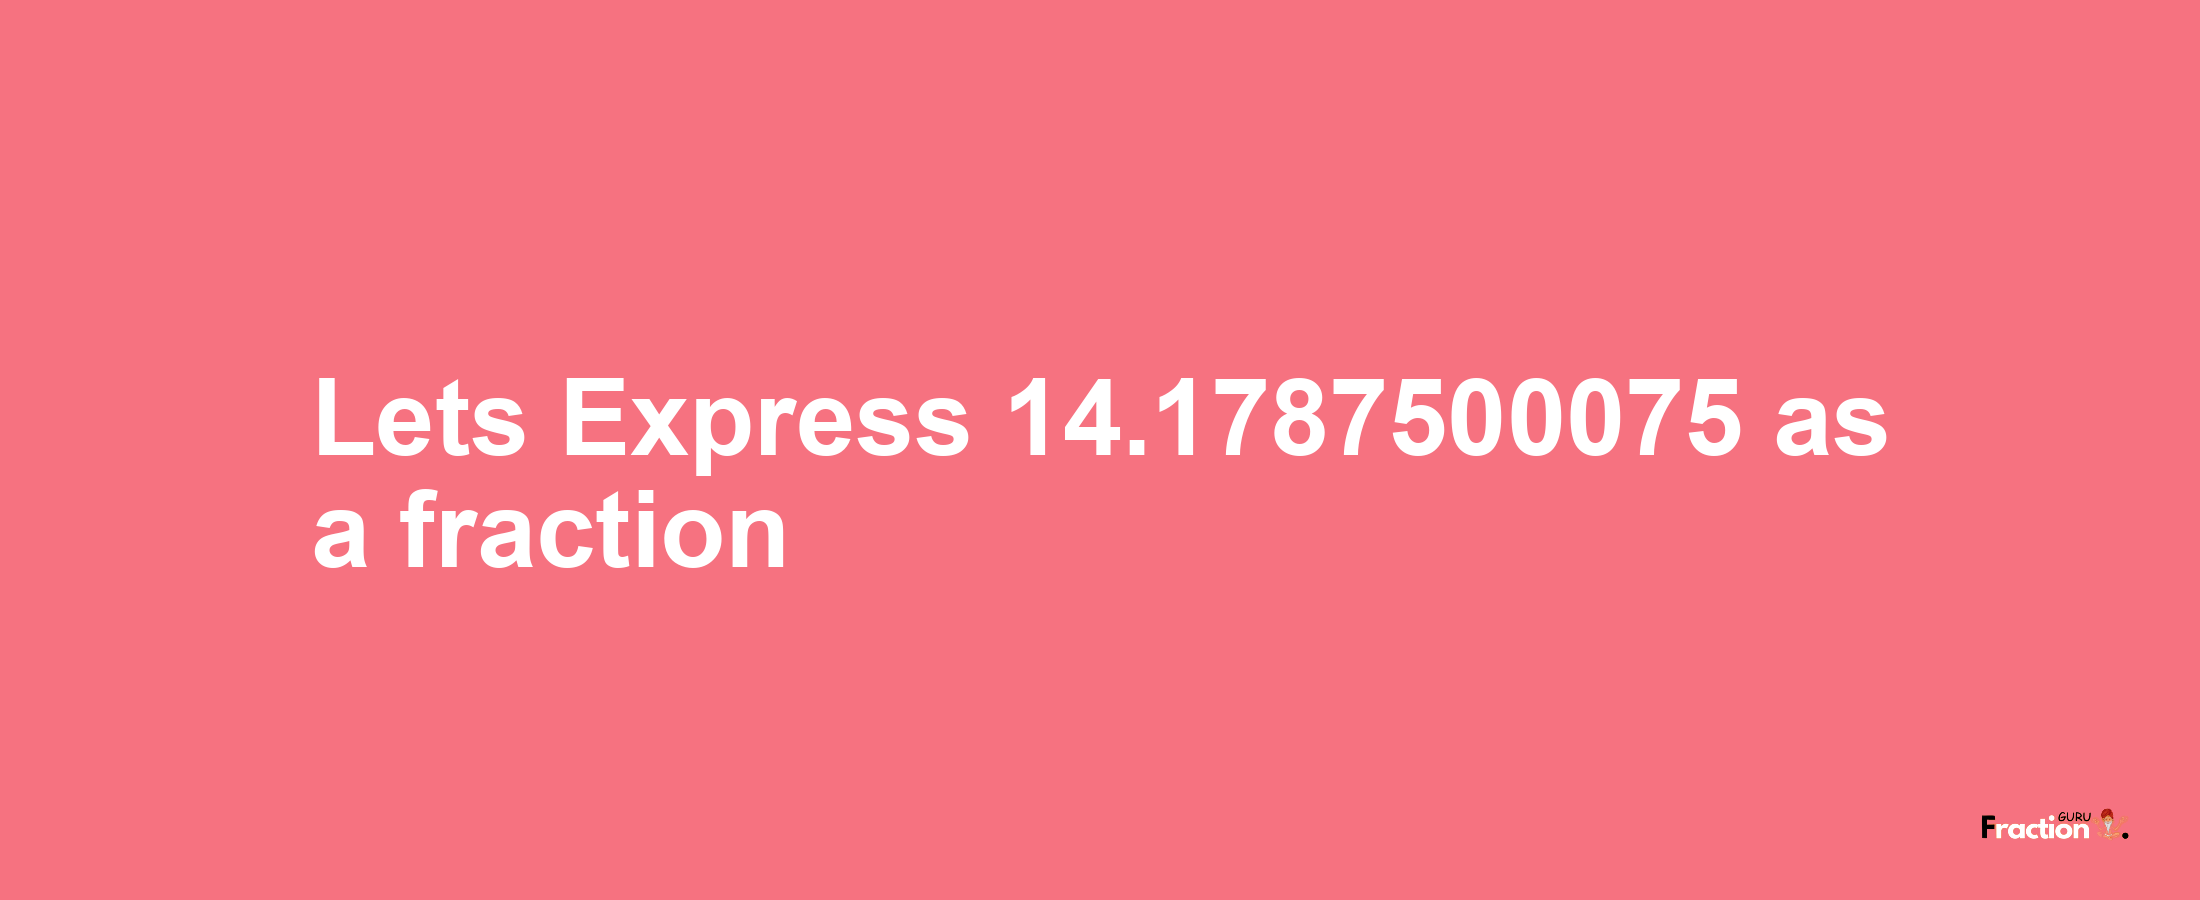 Lets Express 14.1787500075 as afraction